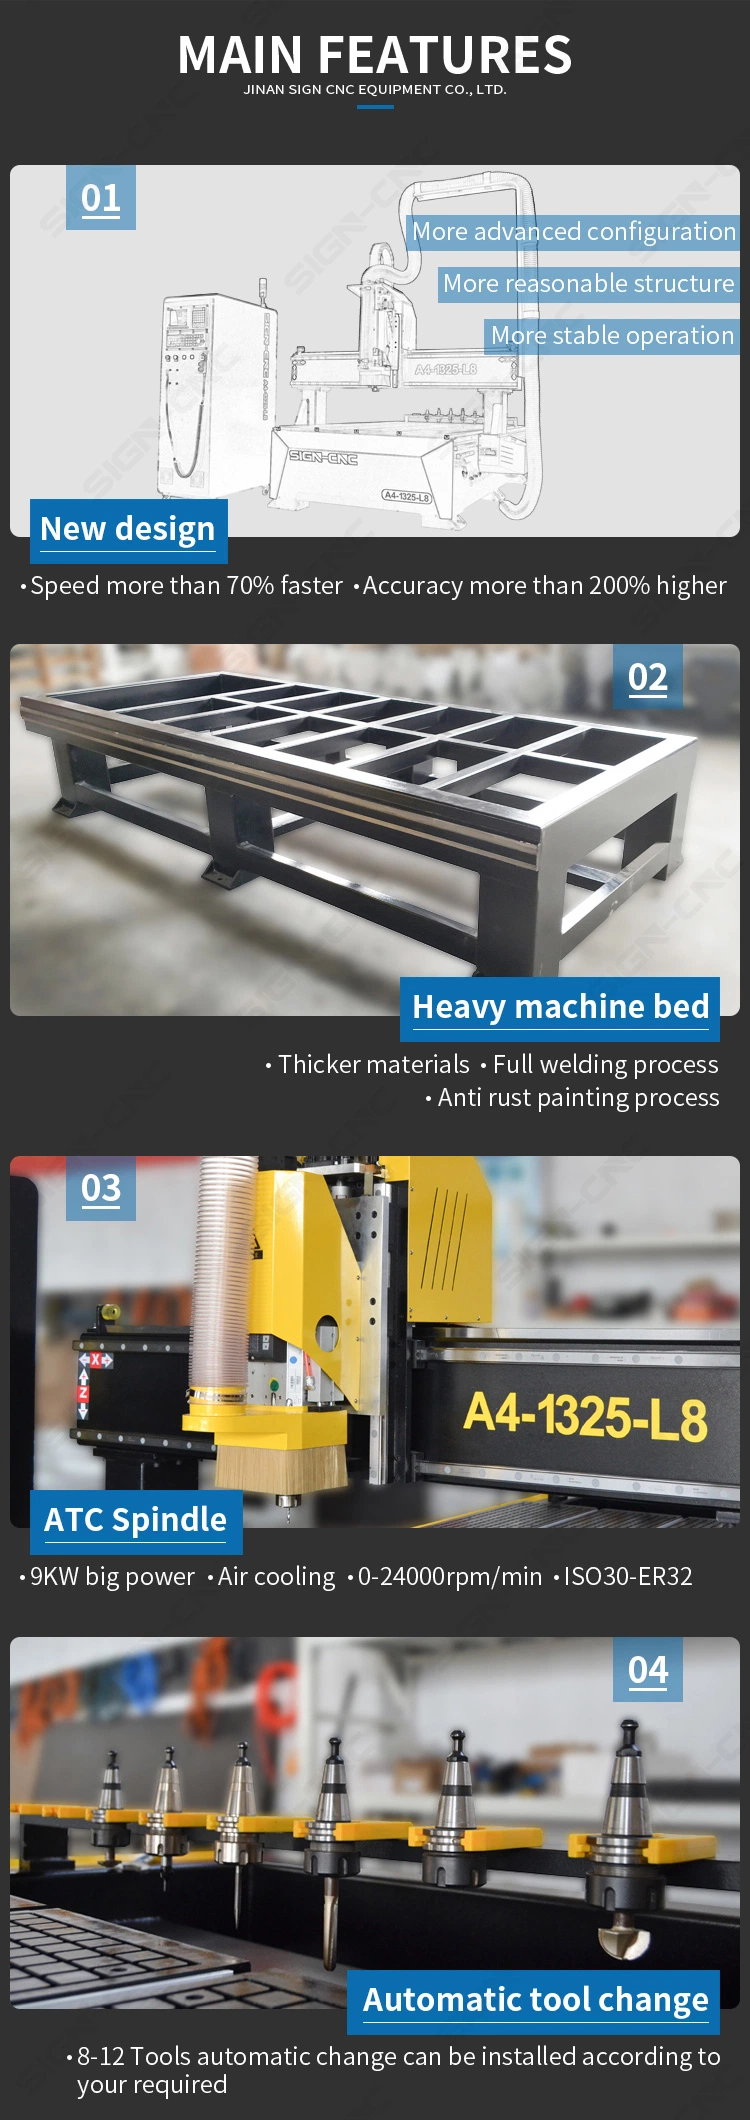 Wood CNC Router A4-1325-L8 Atc CNC Machine Furniture Working Cutting and Engraving